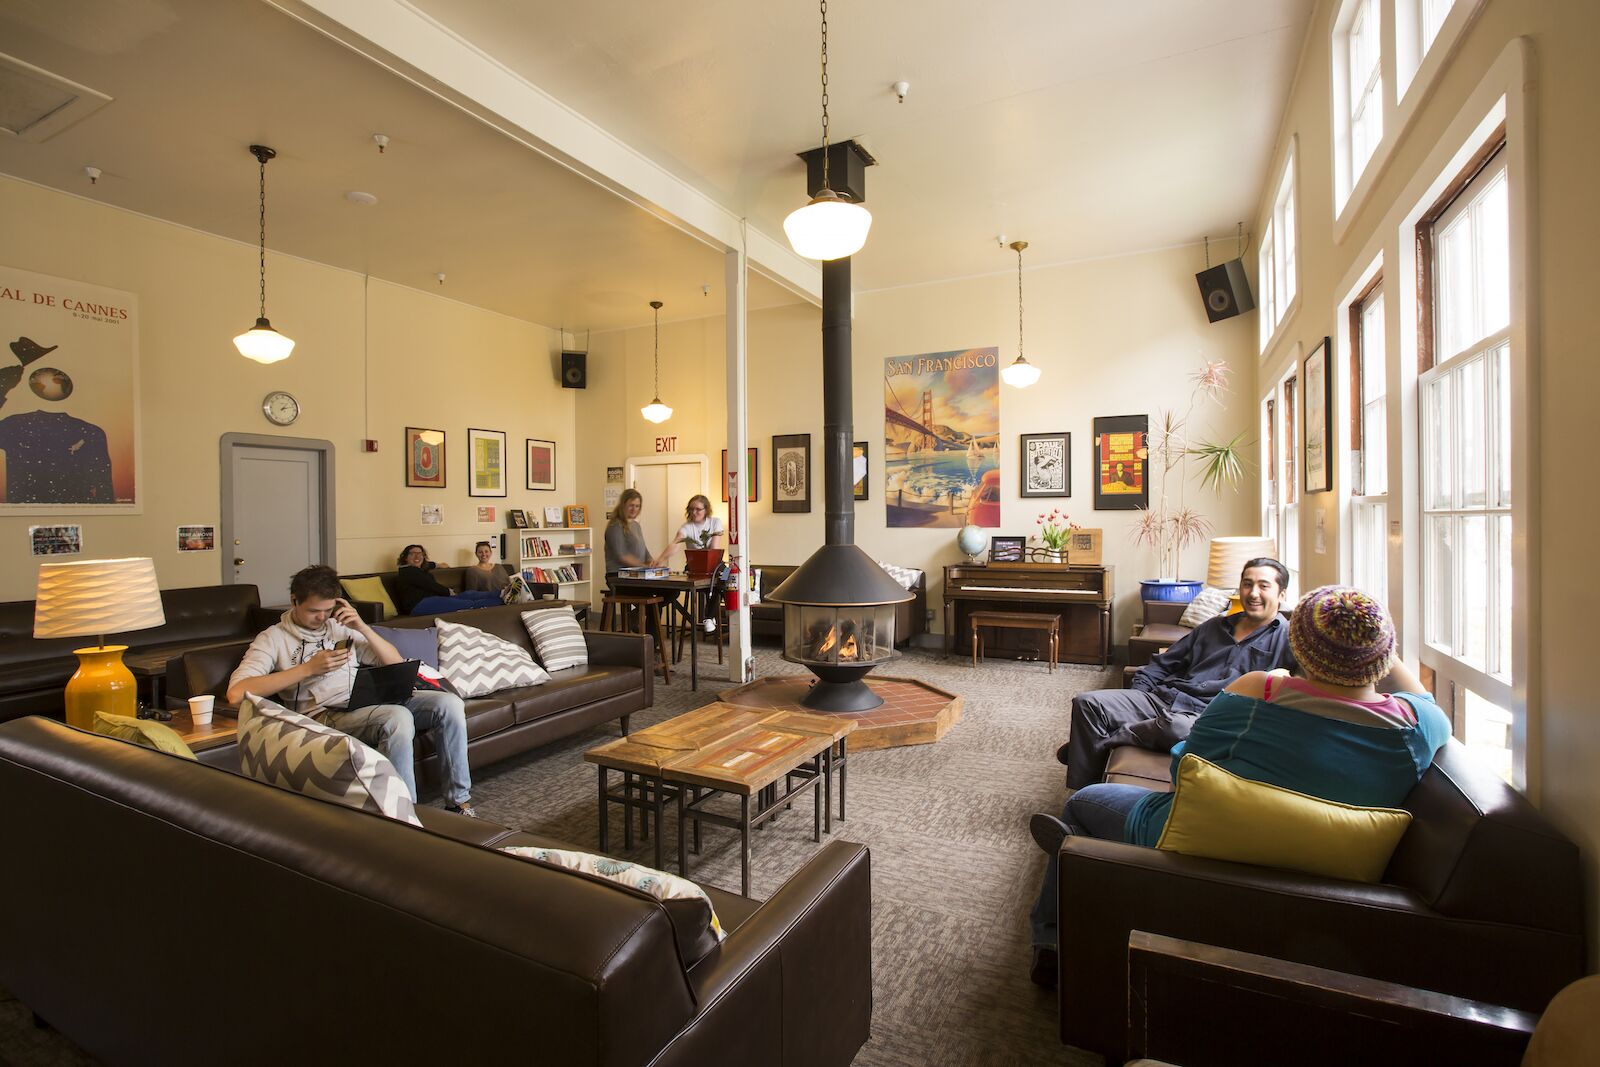 The lounge of the hostel Fisherman's Wharf in San Francisco. One of many repurposed buildings turned into hostels.